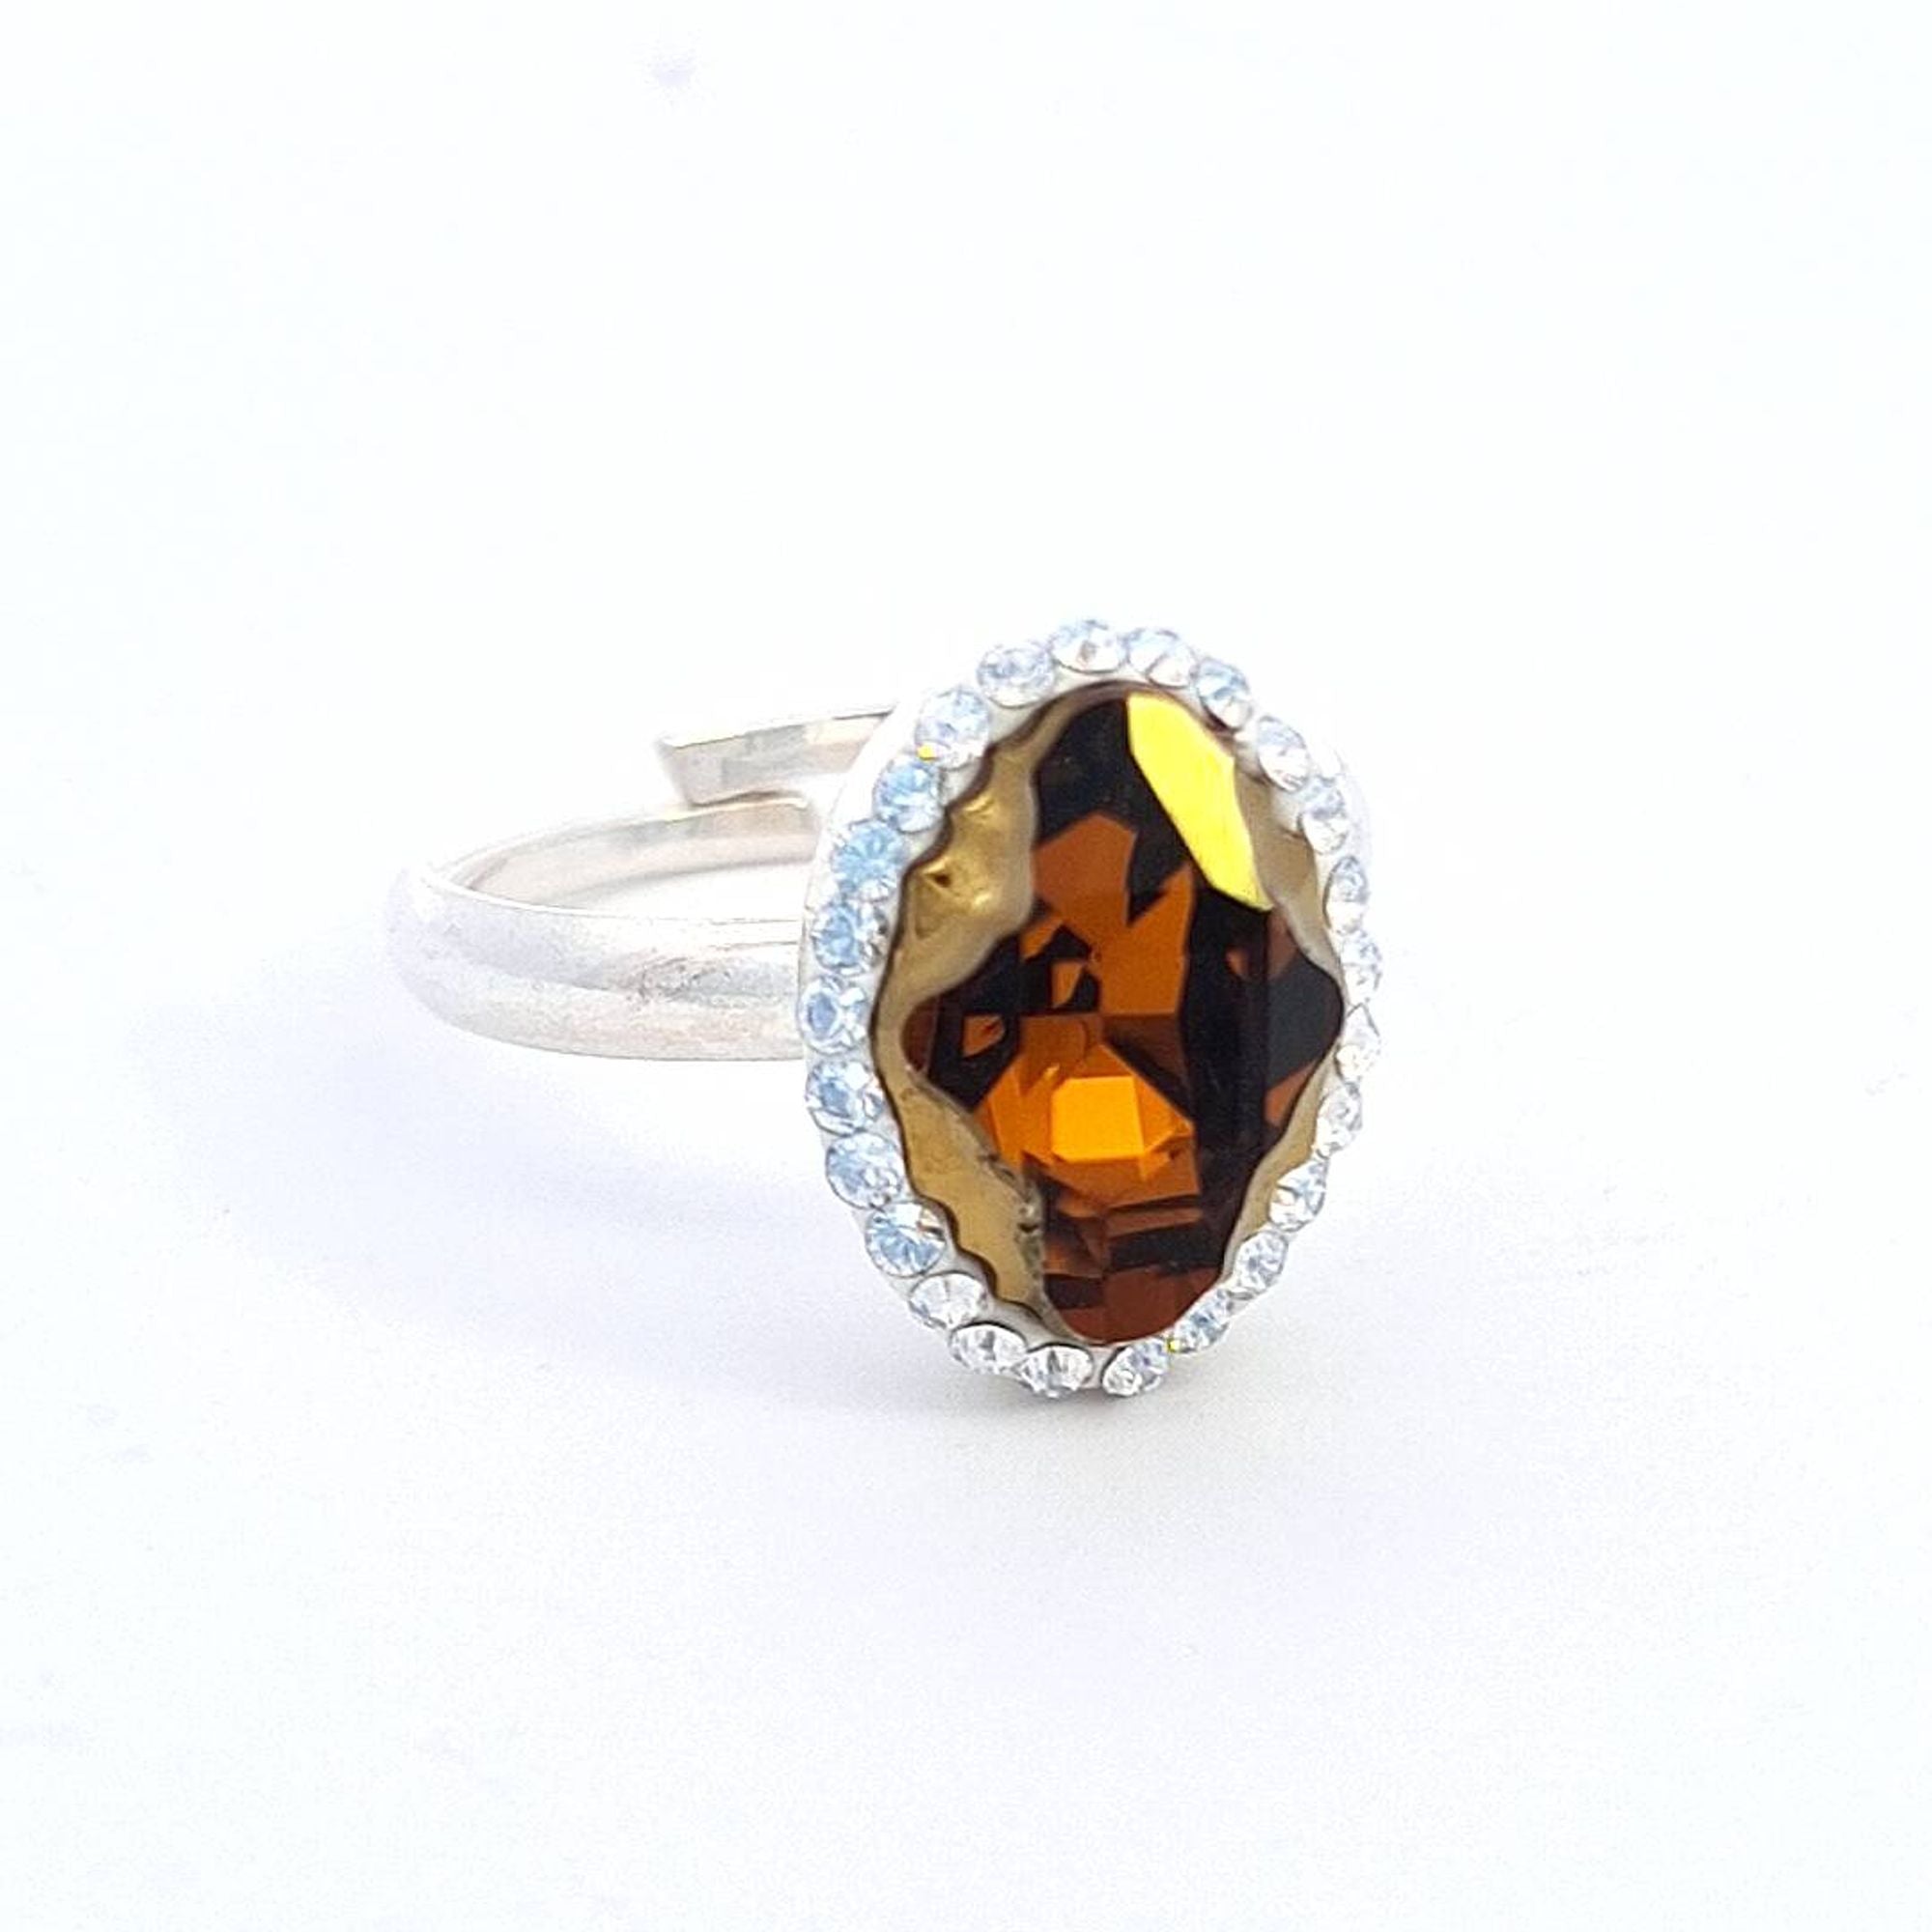 Magpie Gems' Tribe Crystal Amber Aura Halo Ring in Sterling Silver, showcasing an Austrian Tribe crystal. This ring is handmade in Ireland 